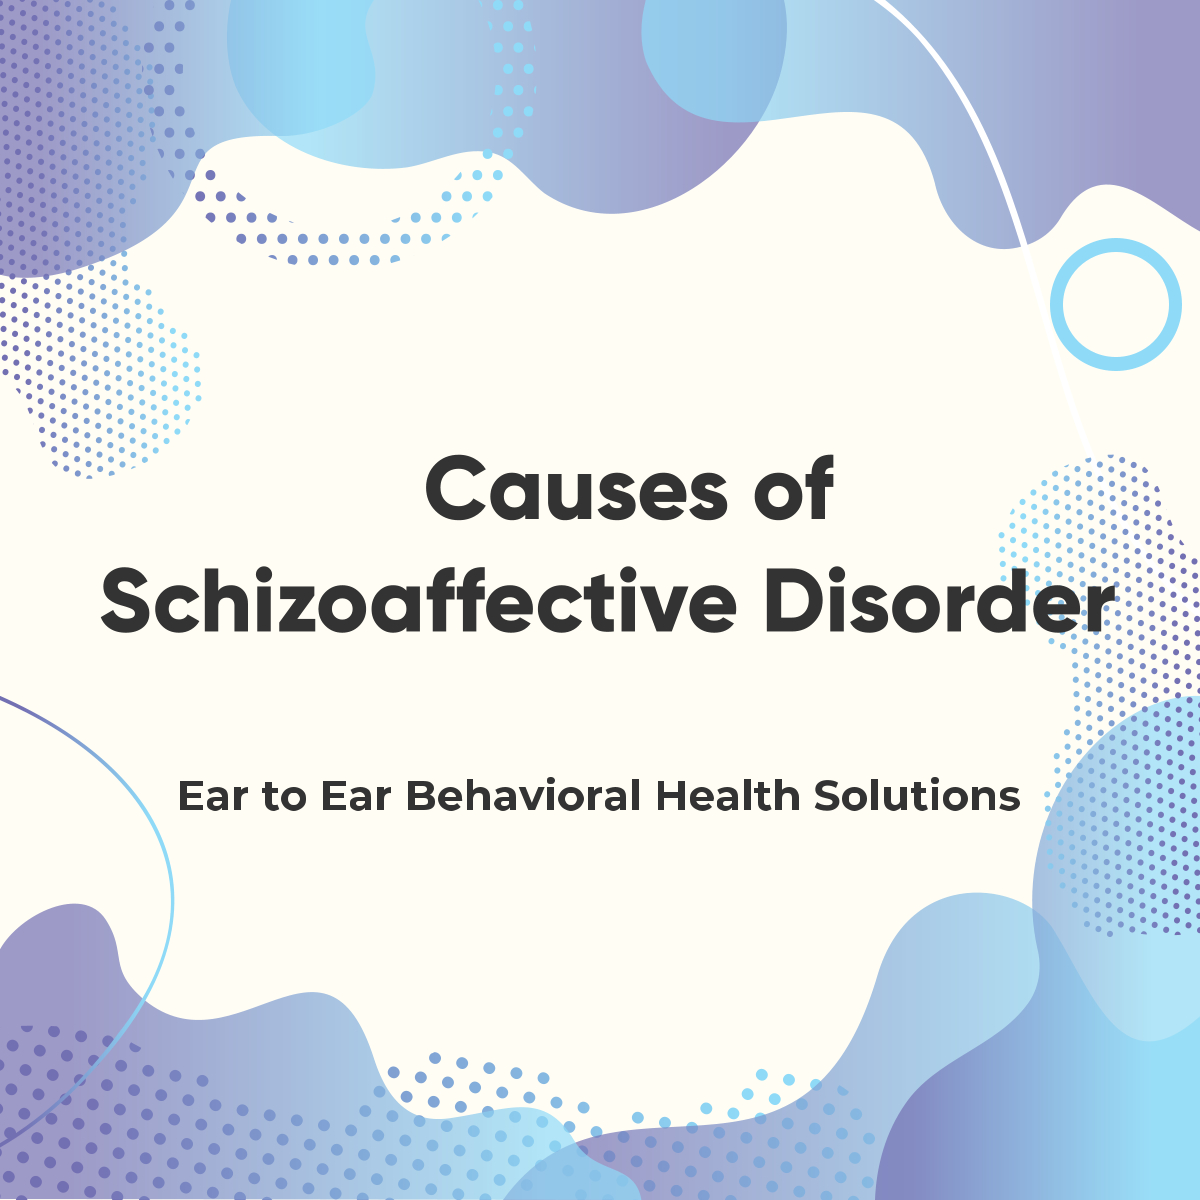 Although the exact cause of schizoaffective disorder is unknown, a combination of causes may contribute to its development. This includes genetics, stress, psychoactive drug use, and changes in brain chemistry and structure.

#SchizoaffectiveDisorder #ChicagoIL #MentalHealthCare